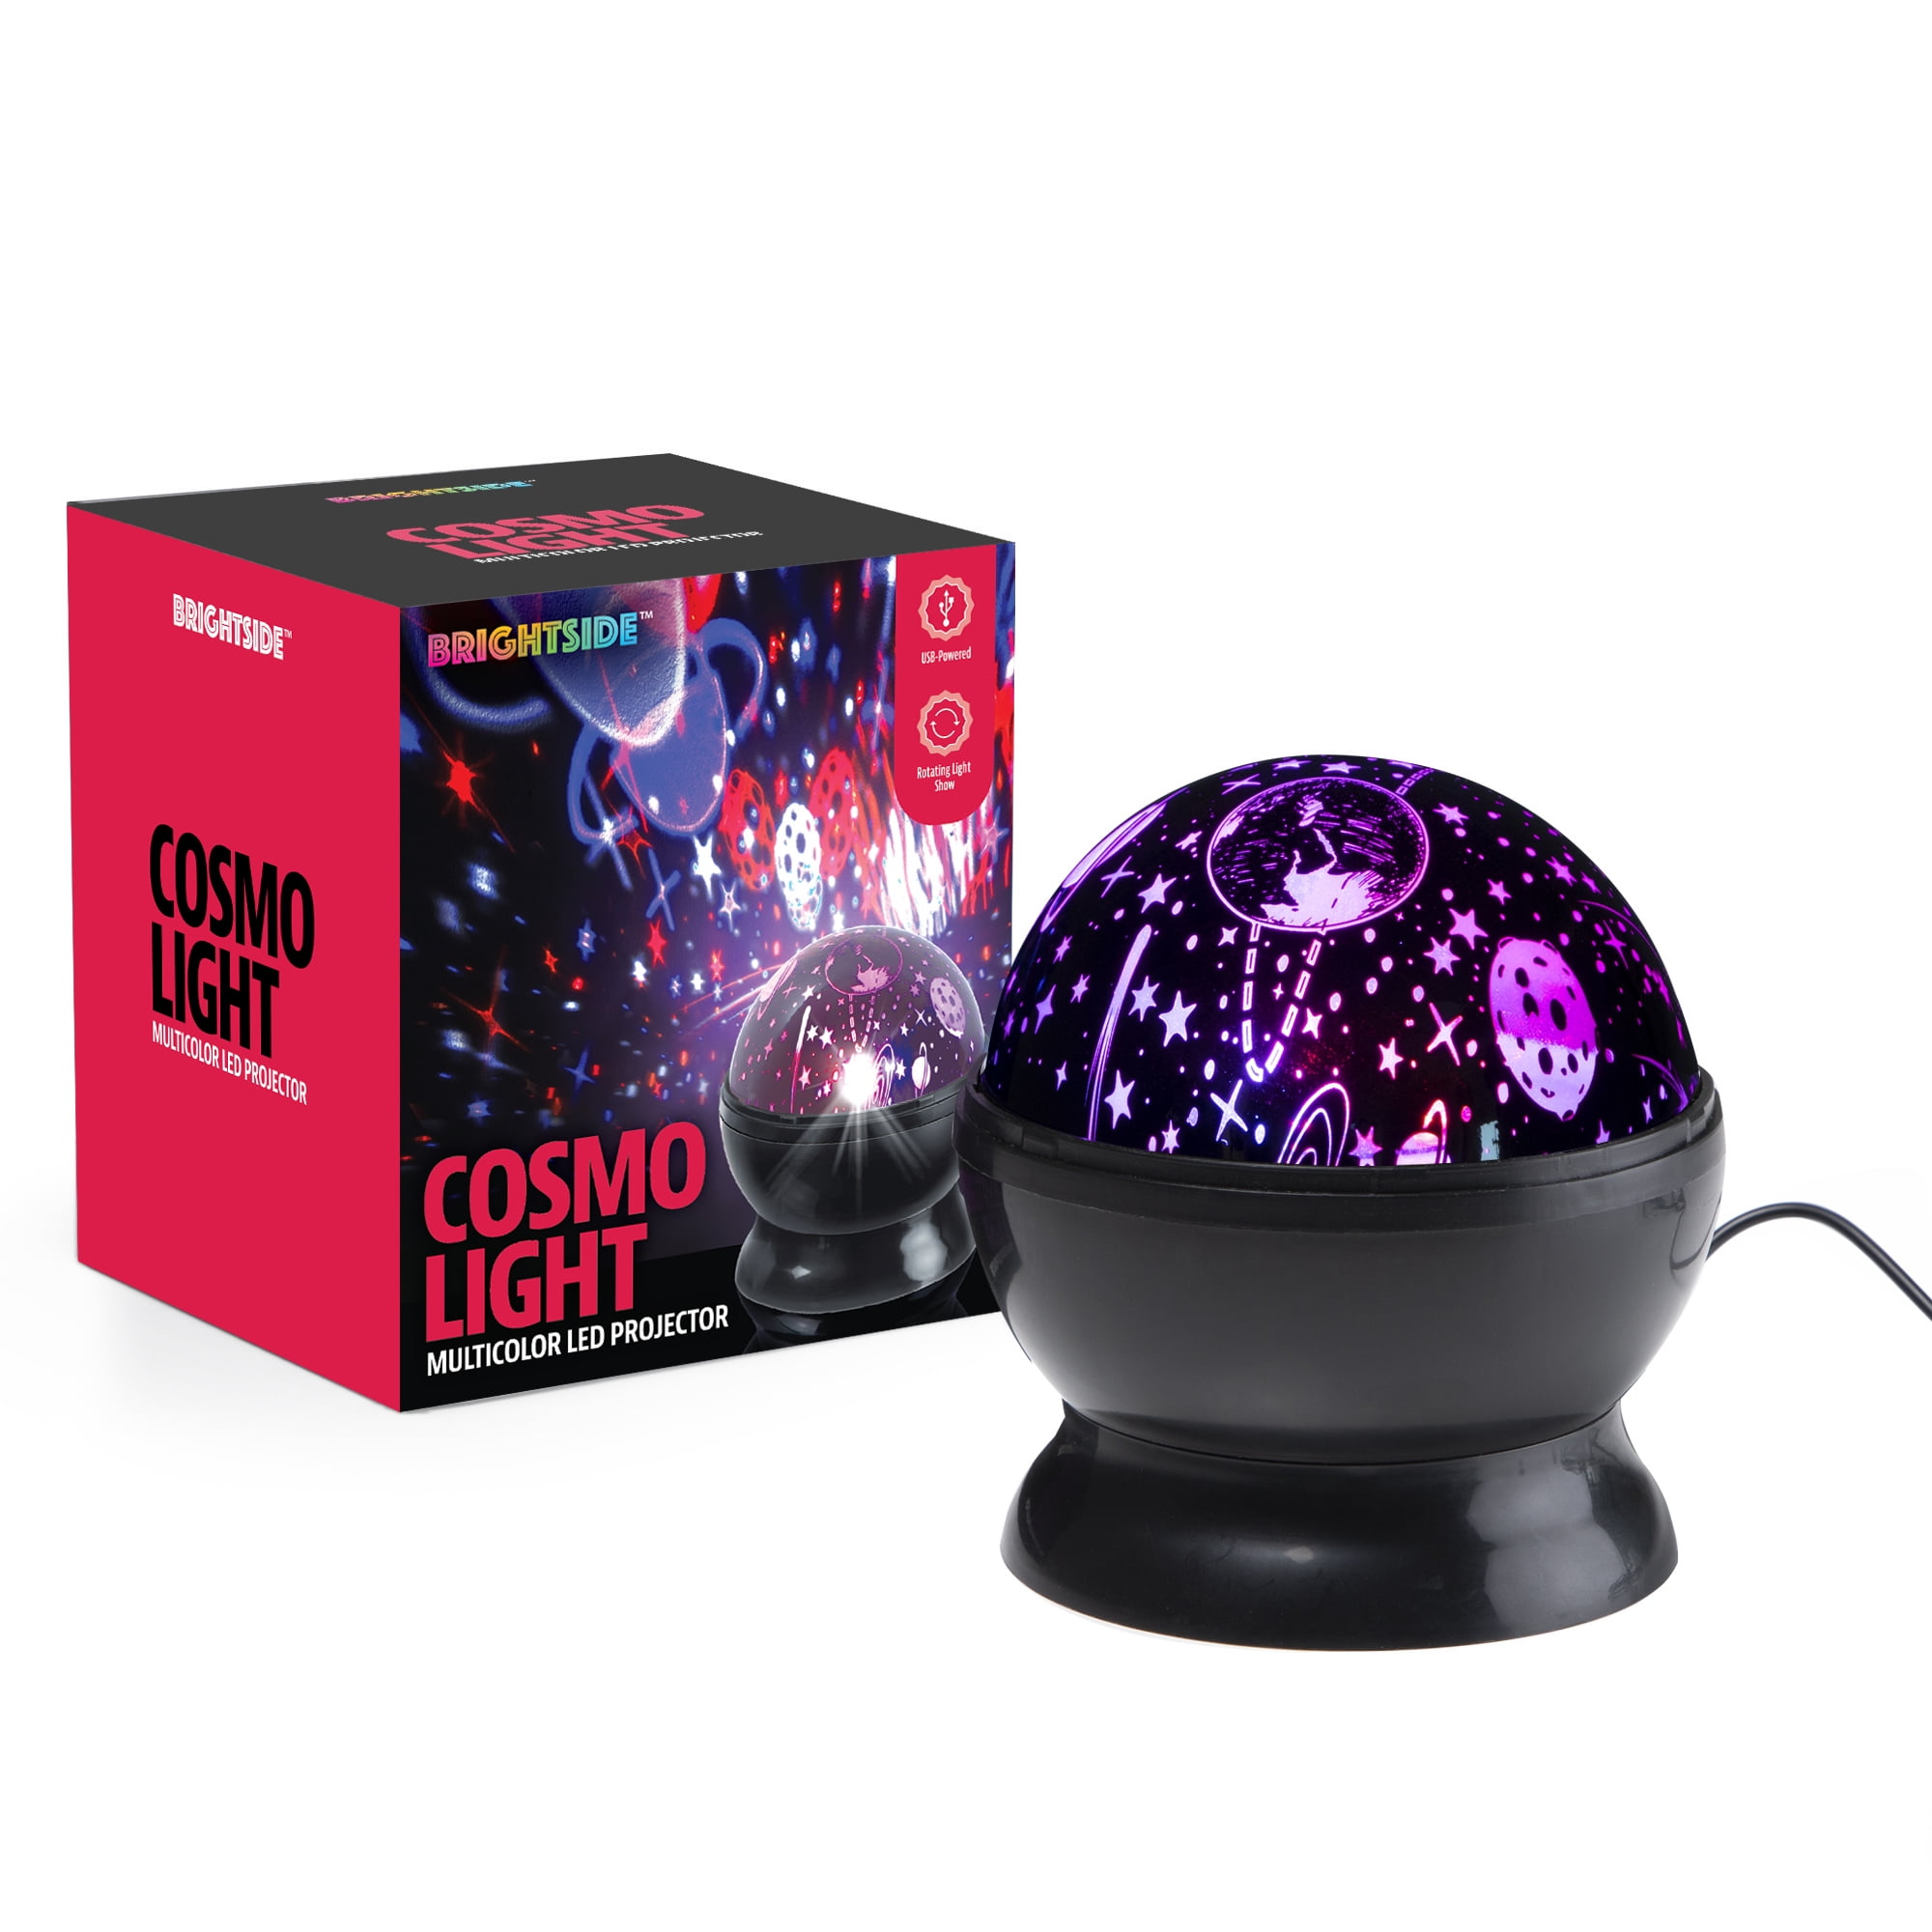 Forstyrret Leopard Diskriminere Brightside Cosmo LED Projector, Multicolor Rotating Lights, Outer Space  Projection, USB or Battery Powered - Walmart.com